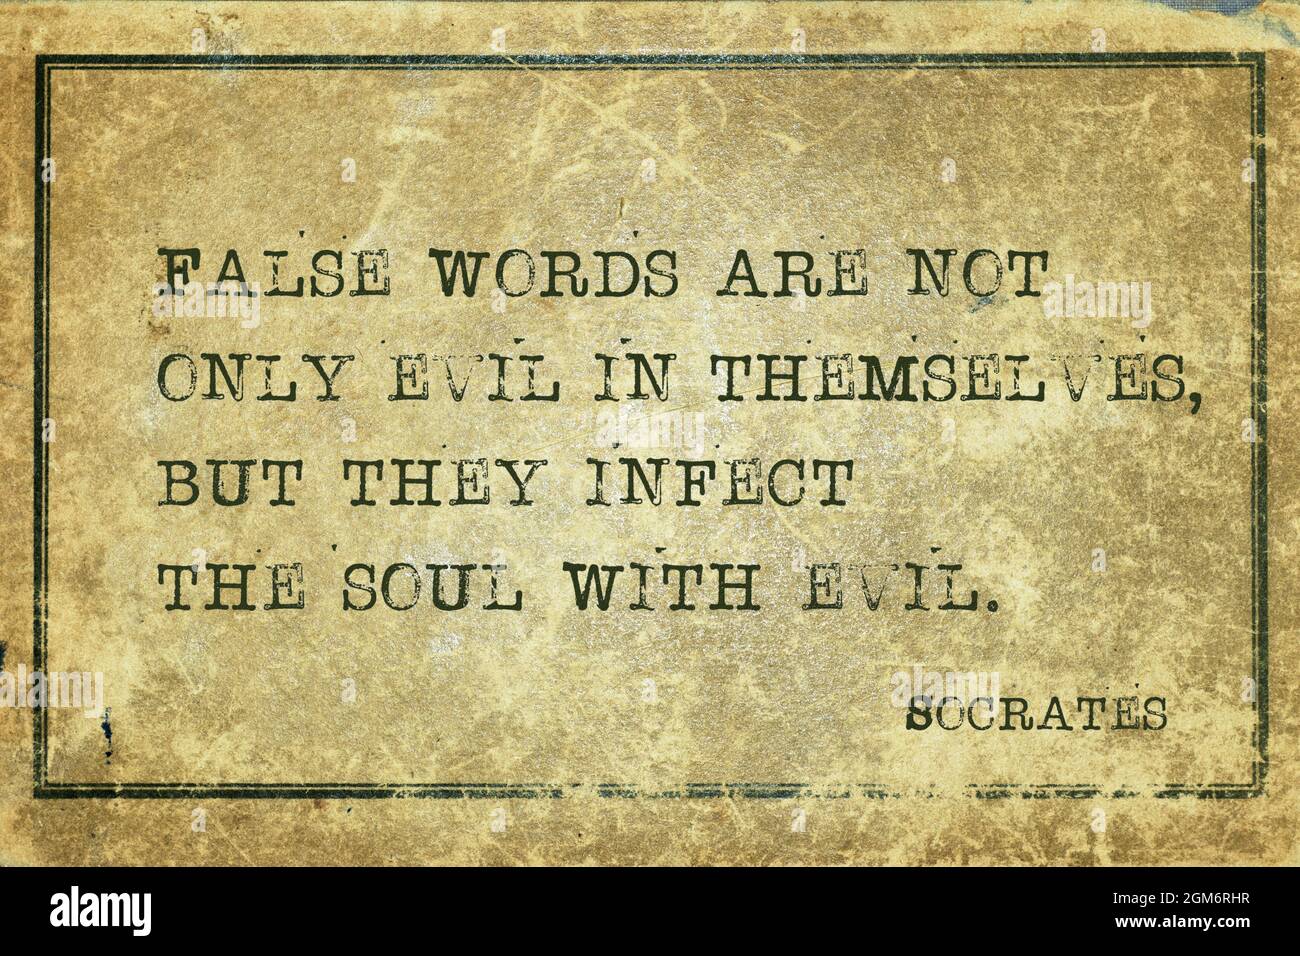 False words are not only evil in themselves, but they infect the soul with evil - ancient Greek philosopher Socrates quote printed on grunge vintage c Stock Photo